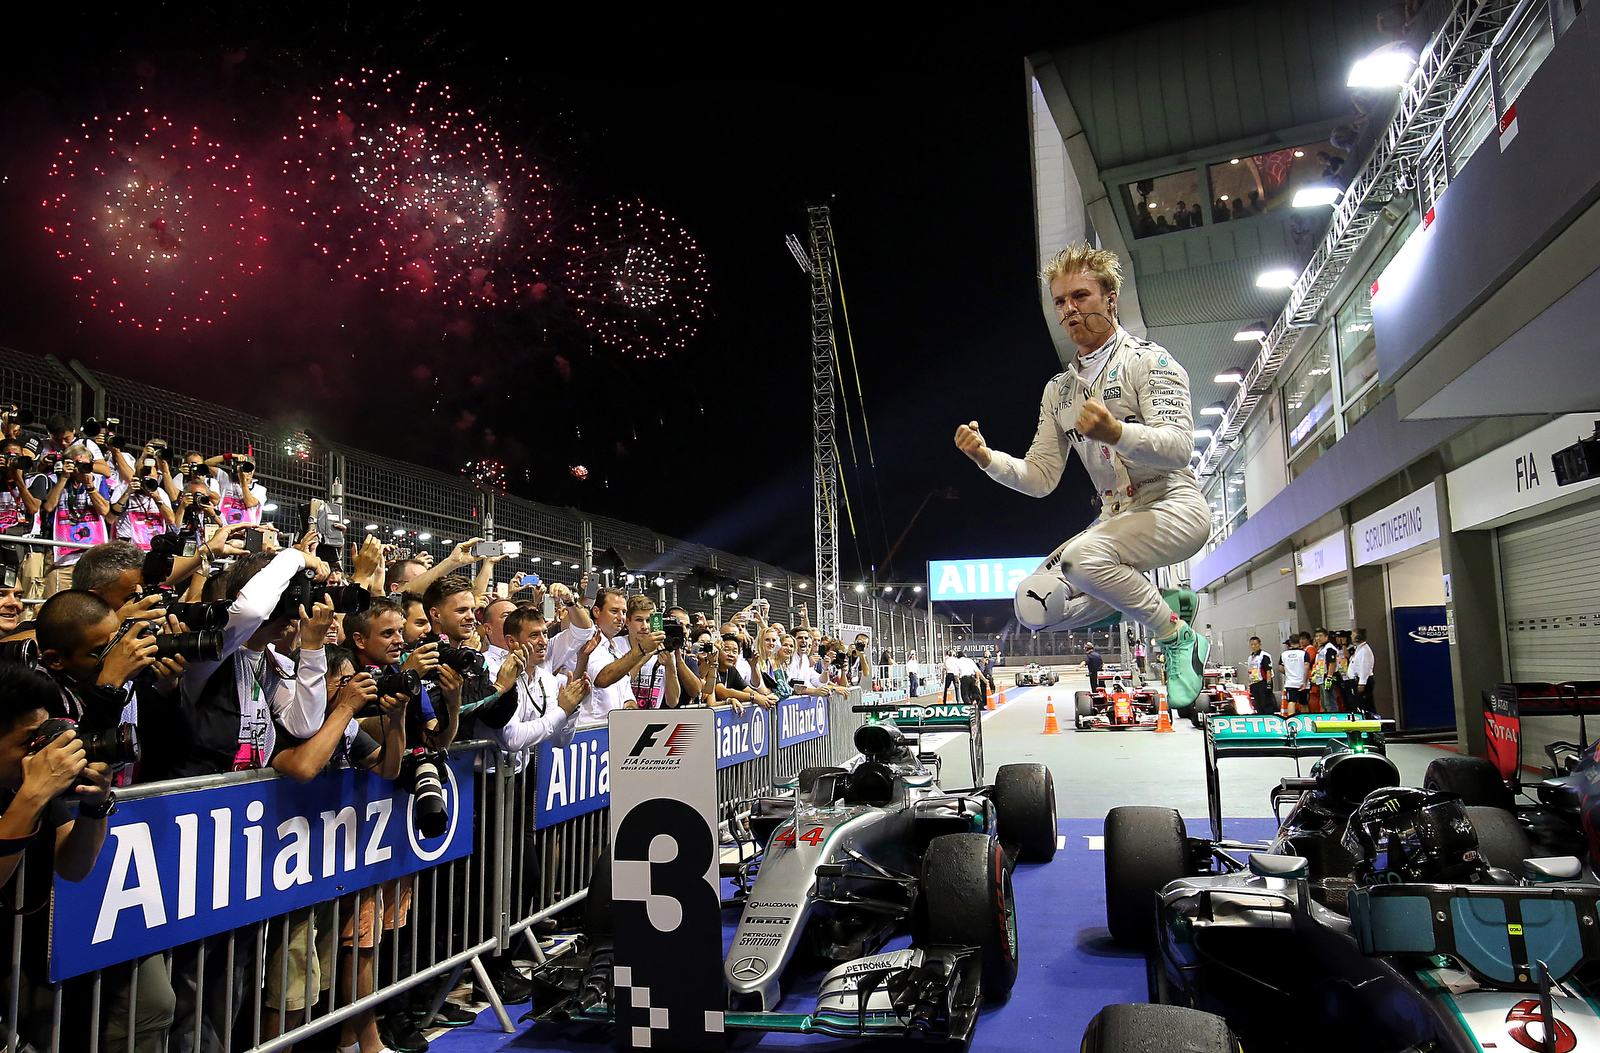  Mercedes driver Nico Rosberg of Germany jumps off his car as he celebrates after winning the Singapore Formula One Grand Prix on the Marina Bay City Circuit Singapore, Sunday, Sept. 18, 2016. (AP Photo/Yong Teck Lim) 